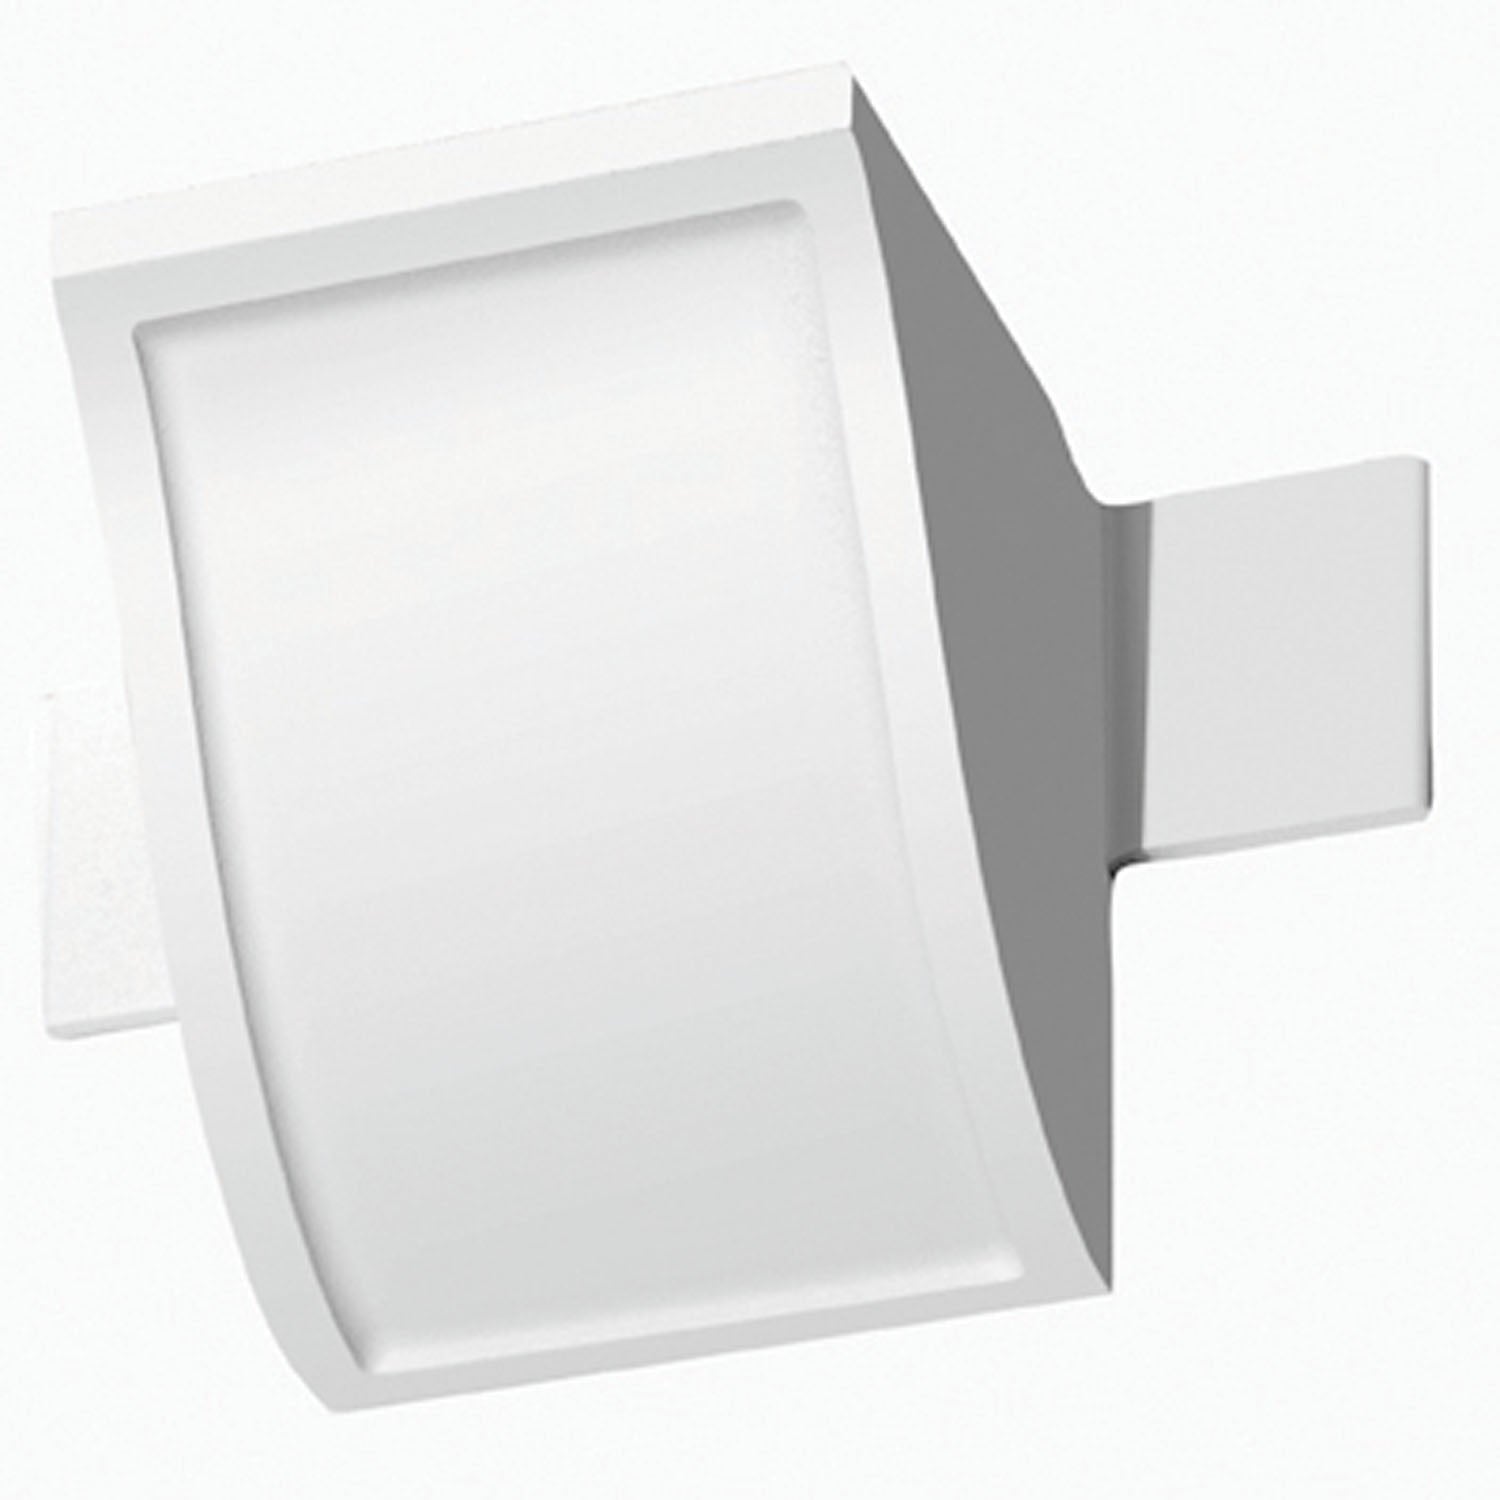 Focal Point Lighting 21610 Accessories 5 7/8 Quick Clips System B Connector Block Decor White